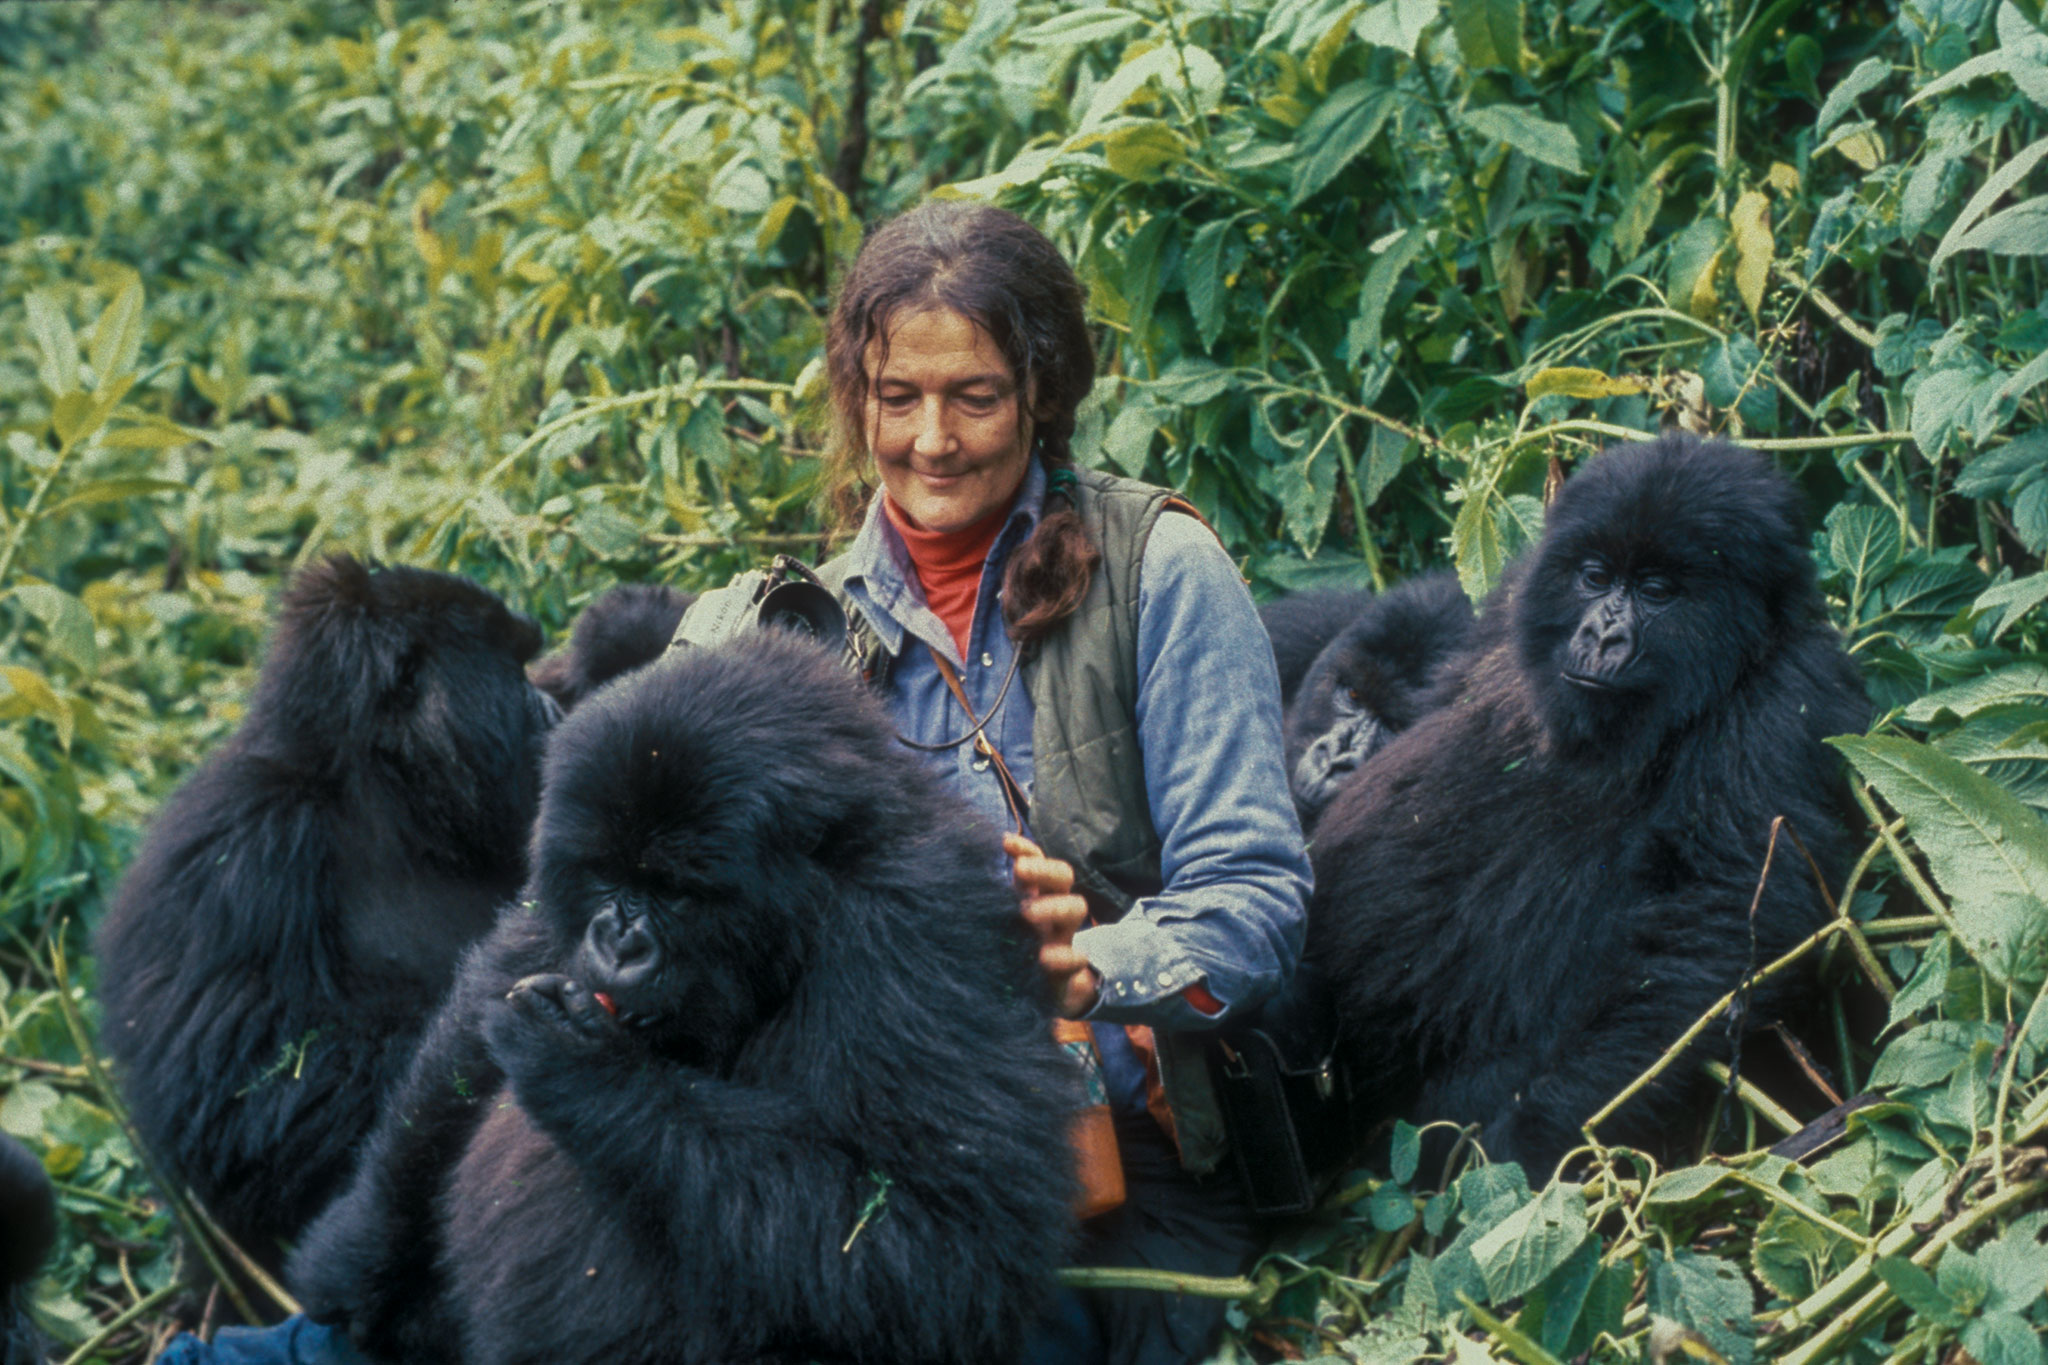 The History of Gorilla Tourism